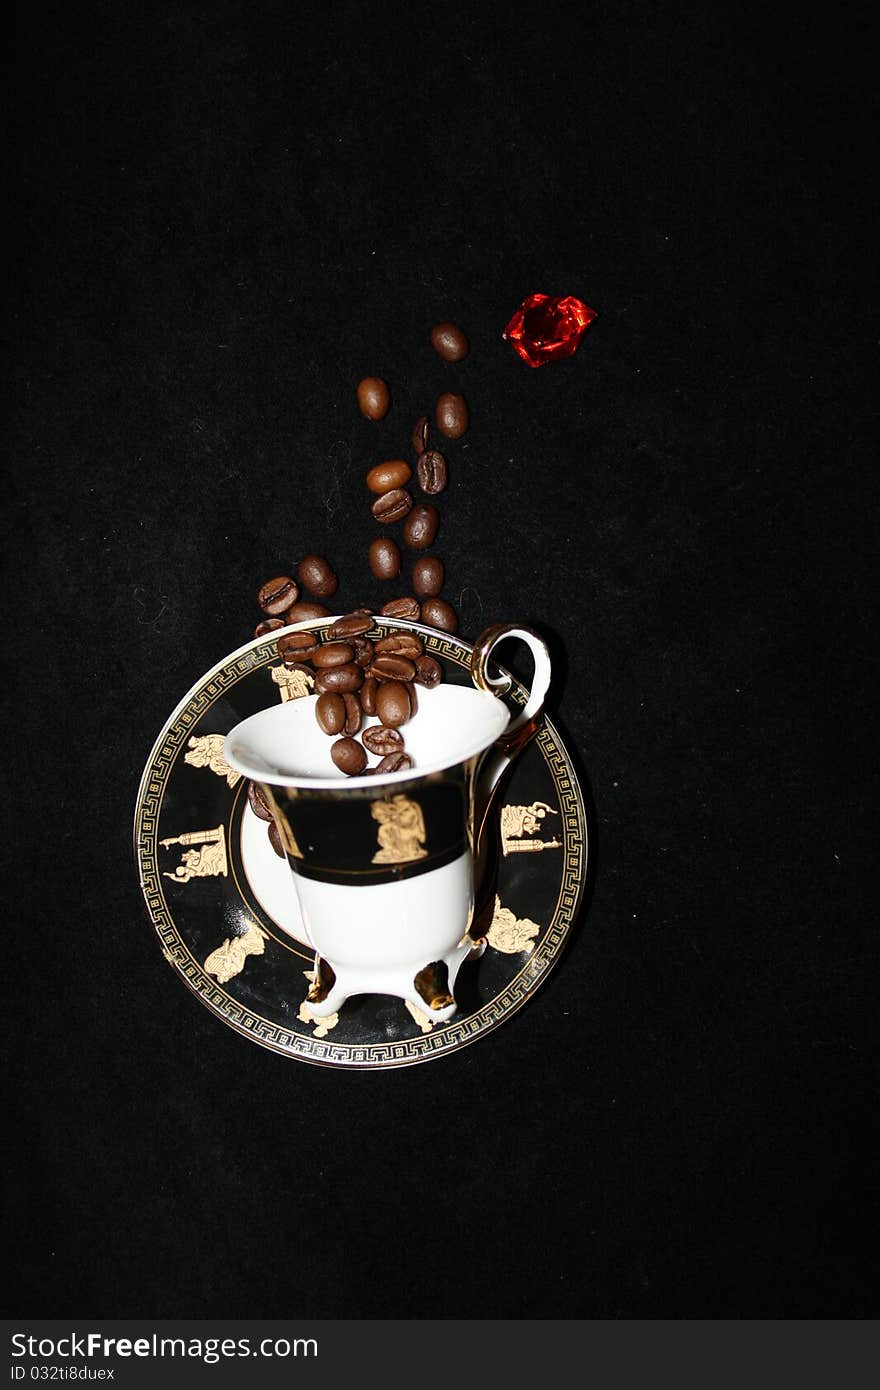 Abstract composition - Coffee beans are flying into the cup. A coffee cup on a black background, the coffee beans and one red crystal drop into the cup. Cup colors are white and black.